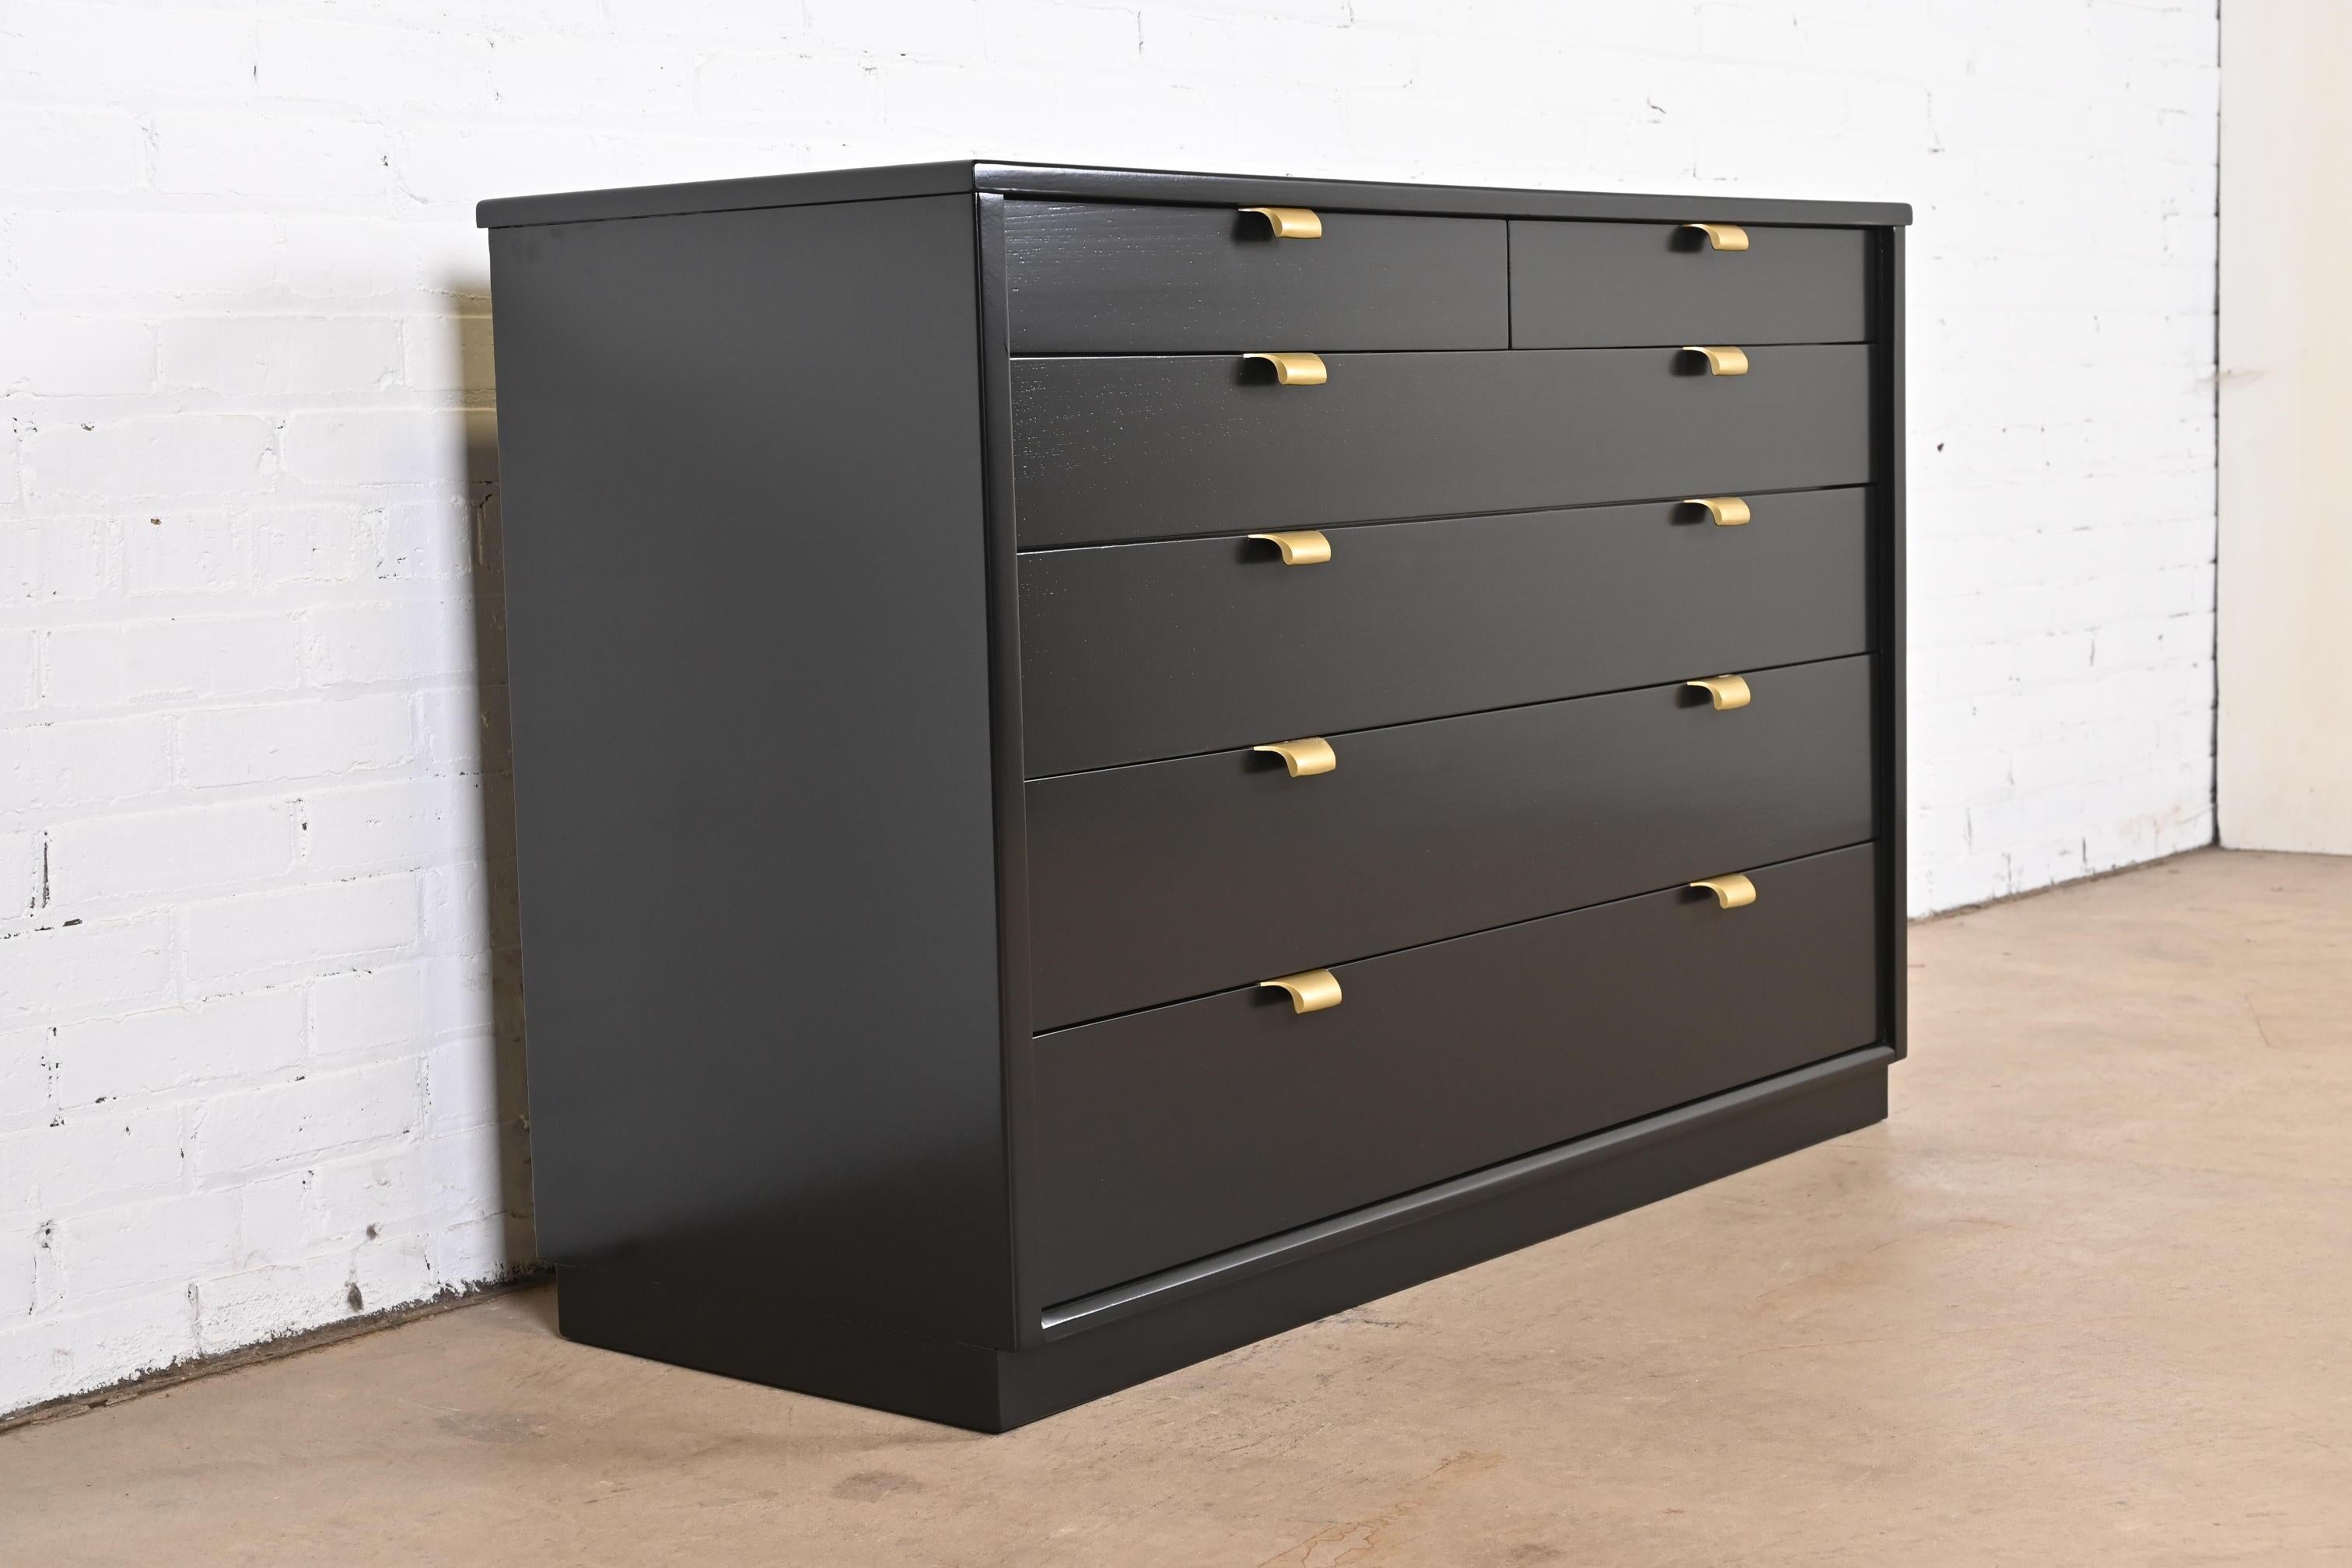 American Edward Wormley for Drexel Precedent Black Lacquered Chest of Drawers, Refinished